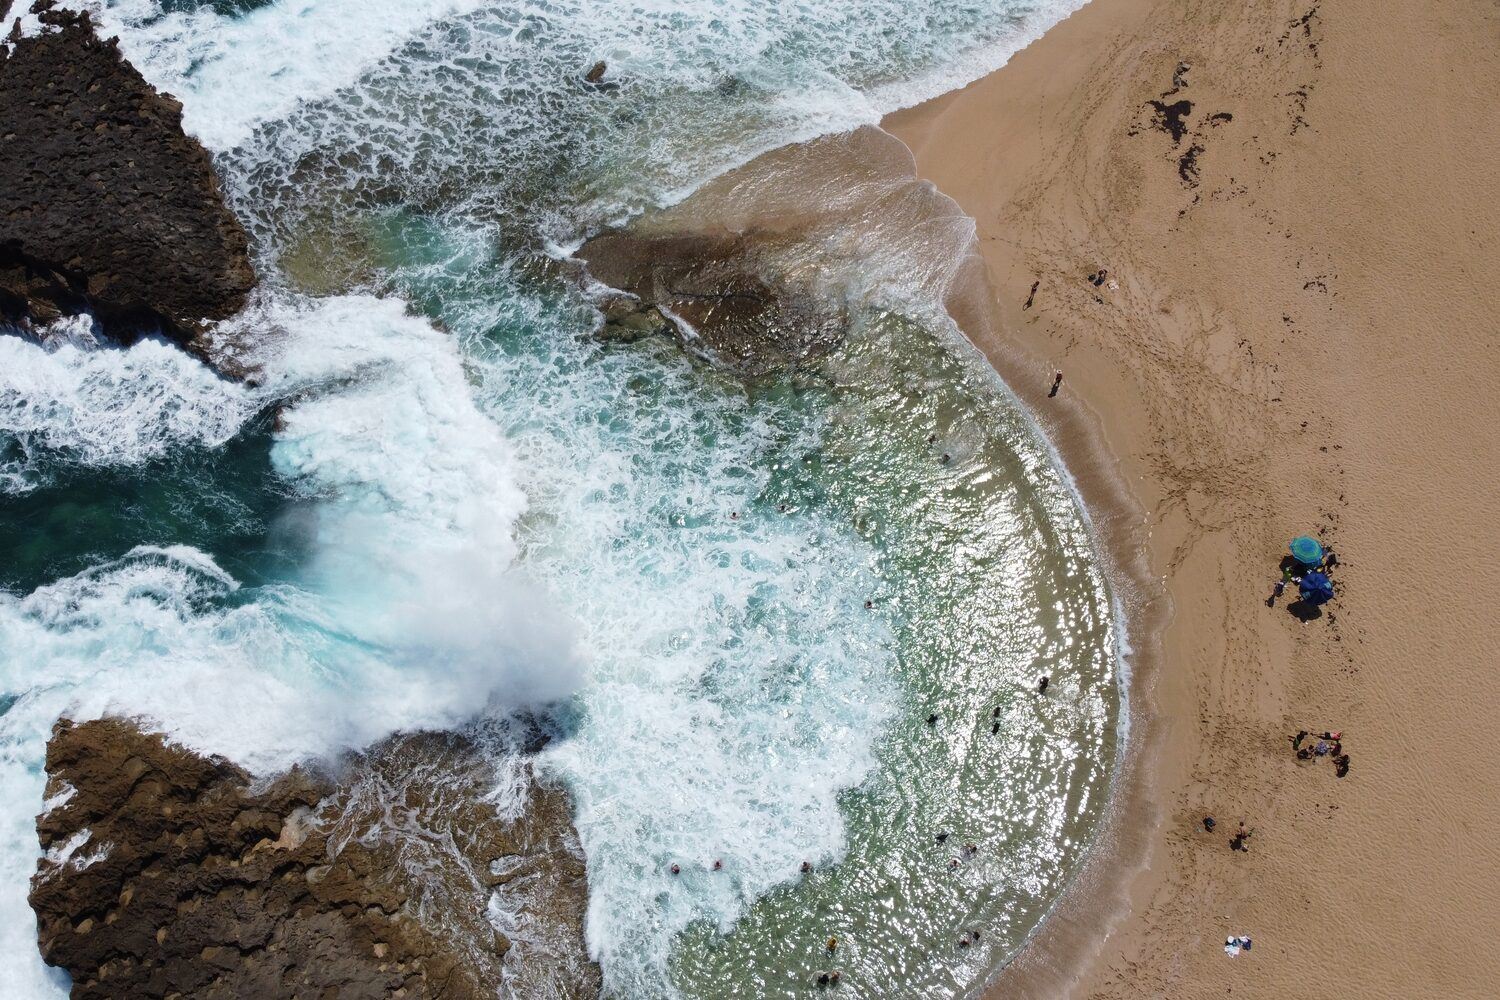 Ariel view of waves cashing at shore of beach in Iceland.